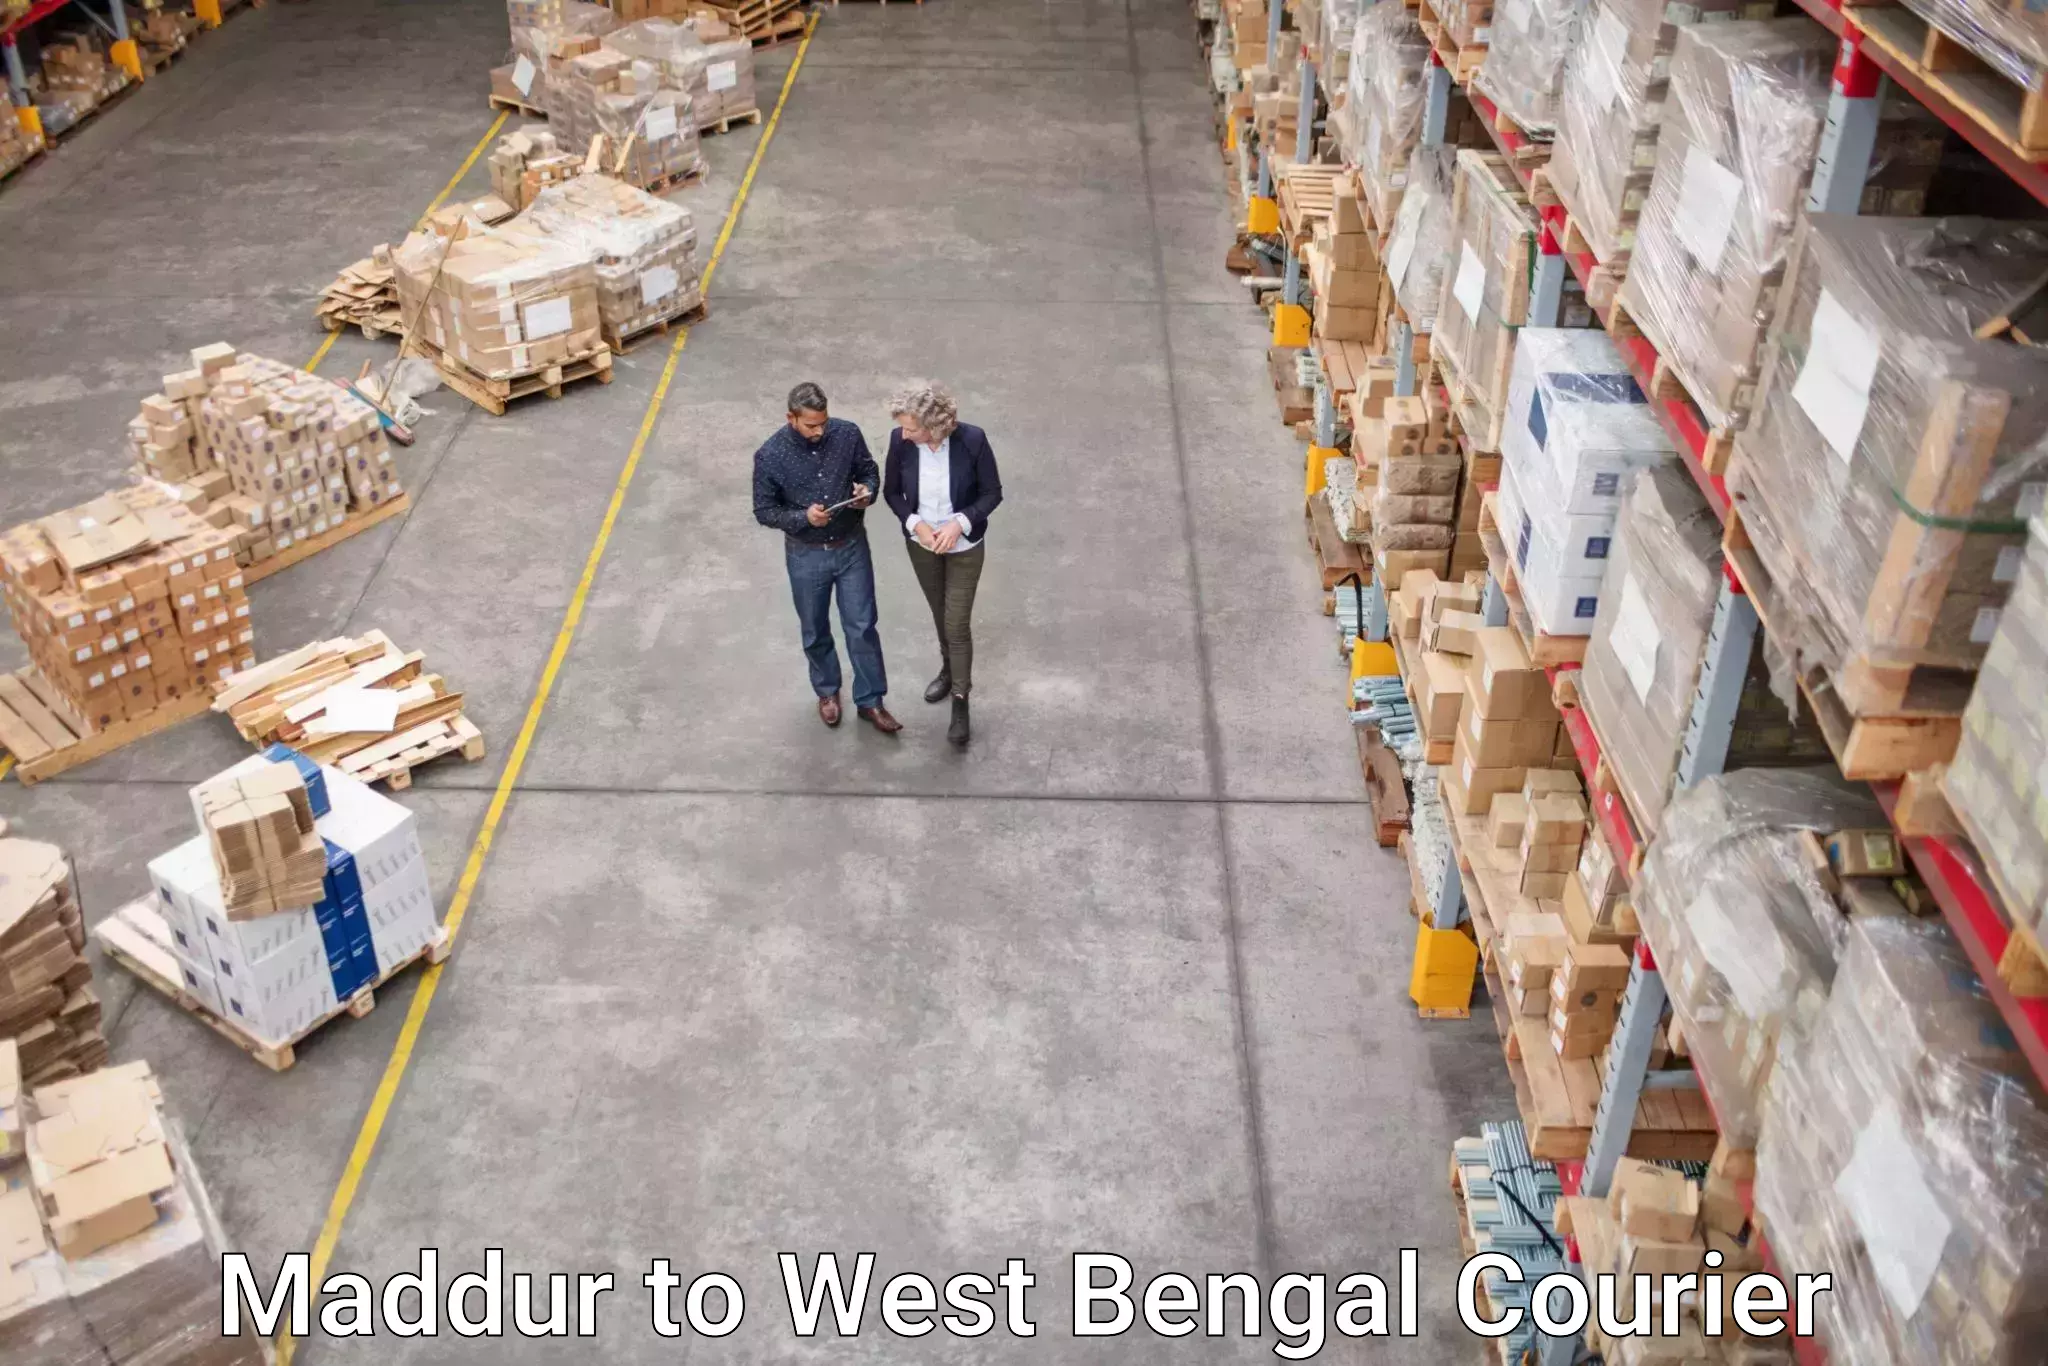 Automated parcel services Maddur to Paschim Medinipur